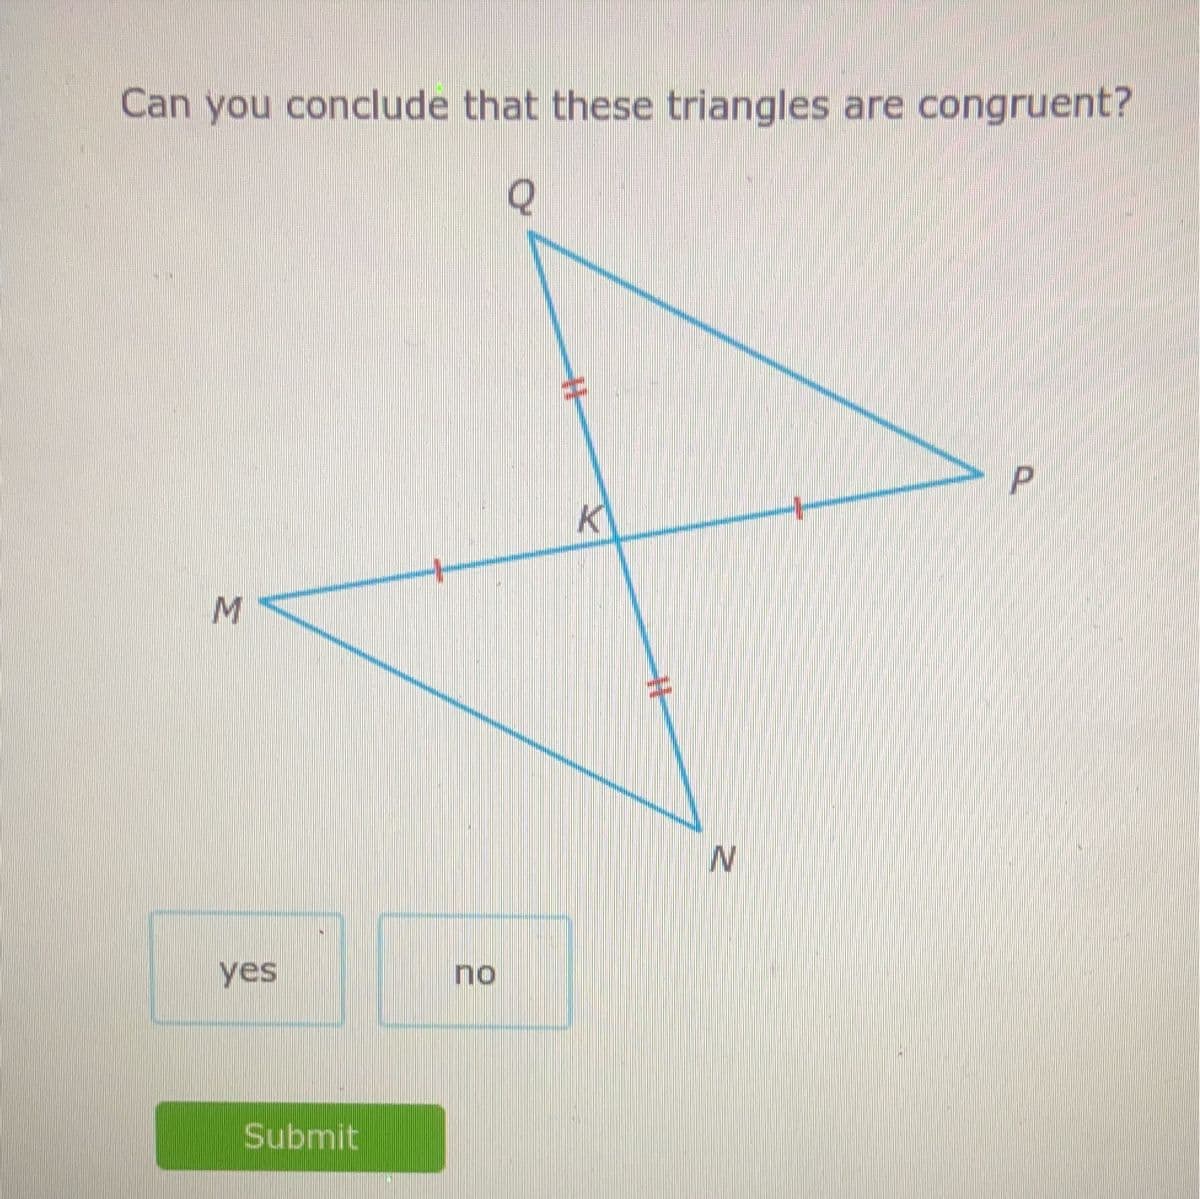 Can you conclude that these triangles are congruent?
Q
M
yes
Submit
+
no
K
N
P